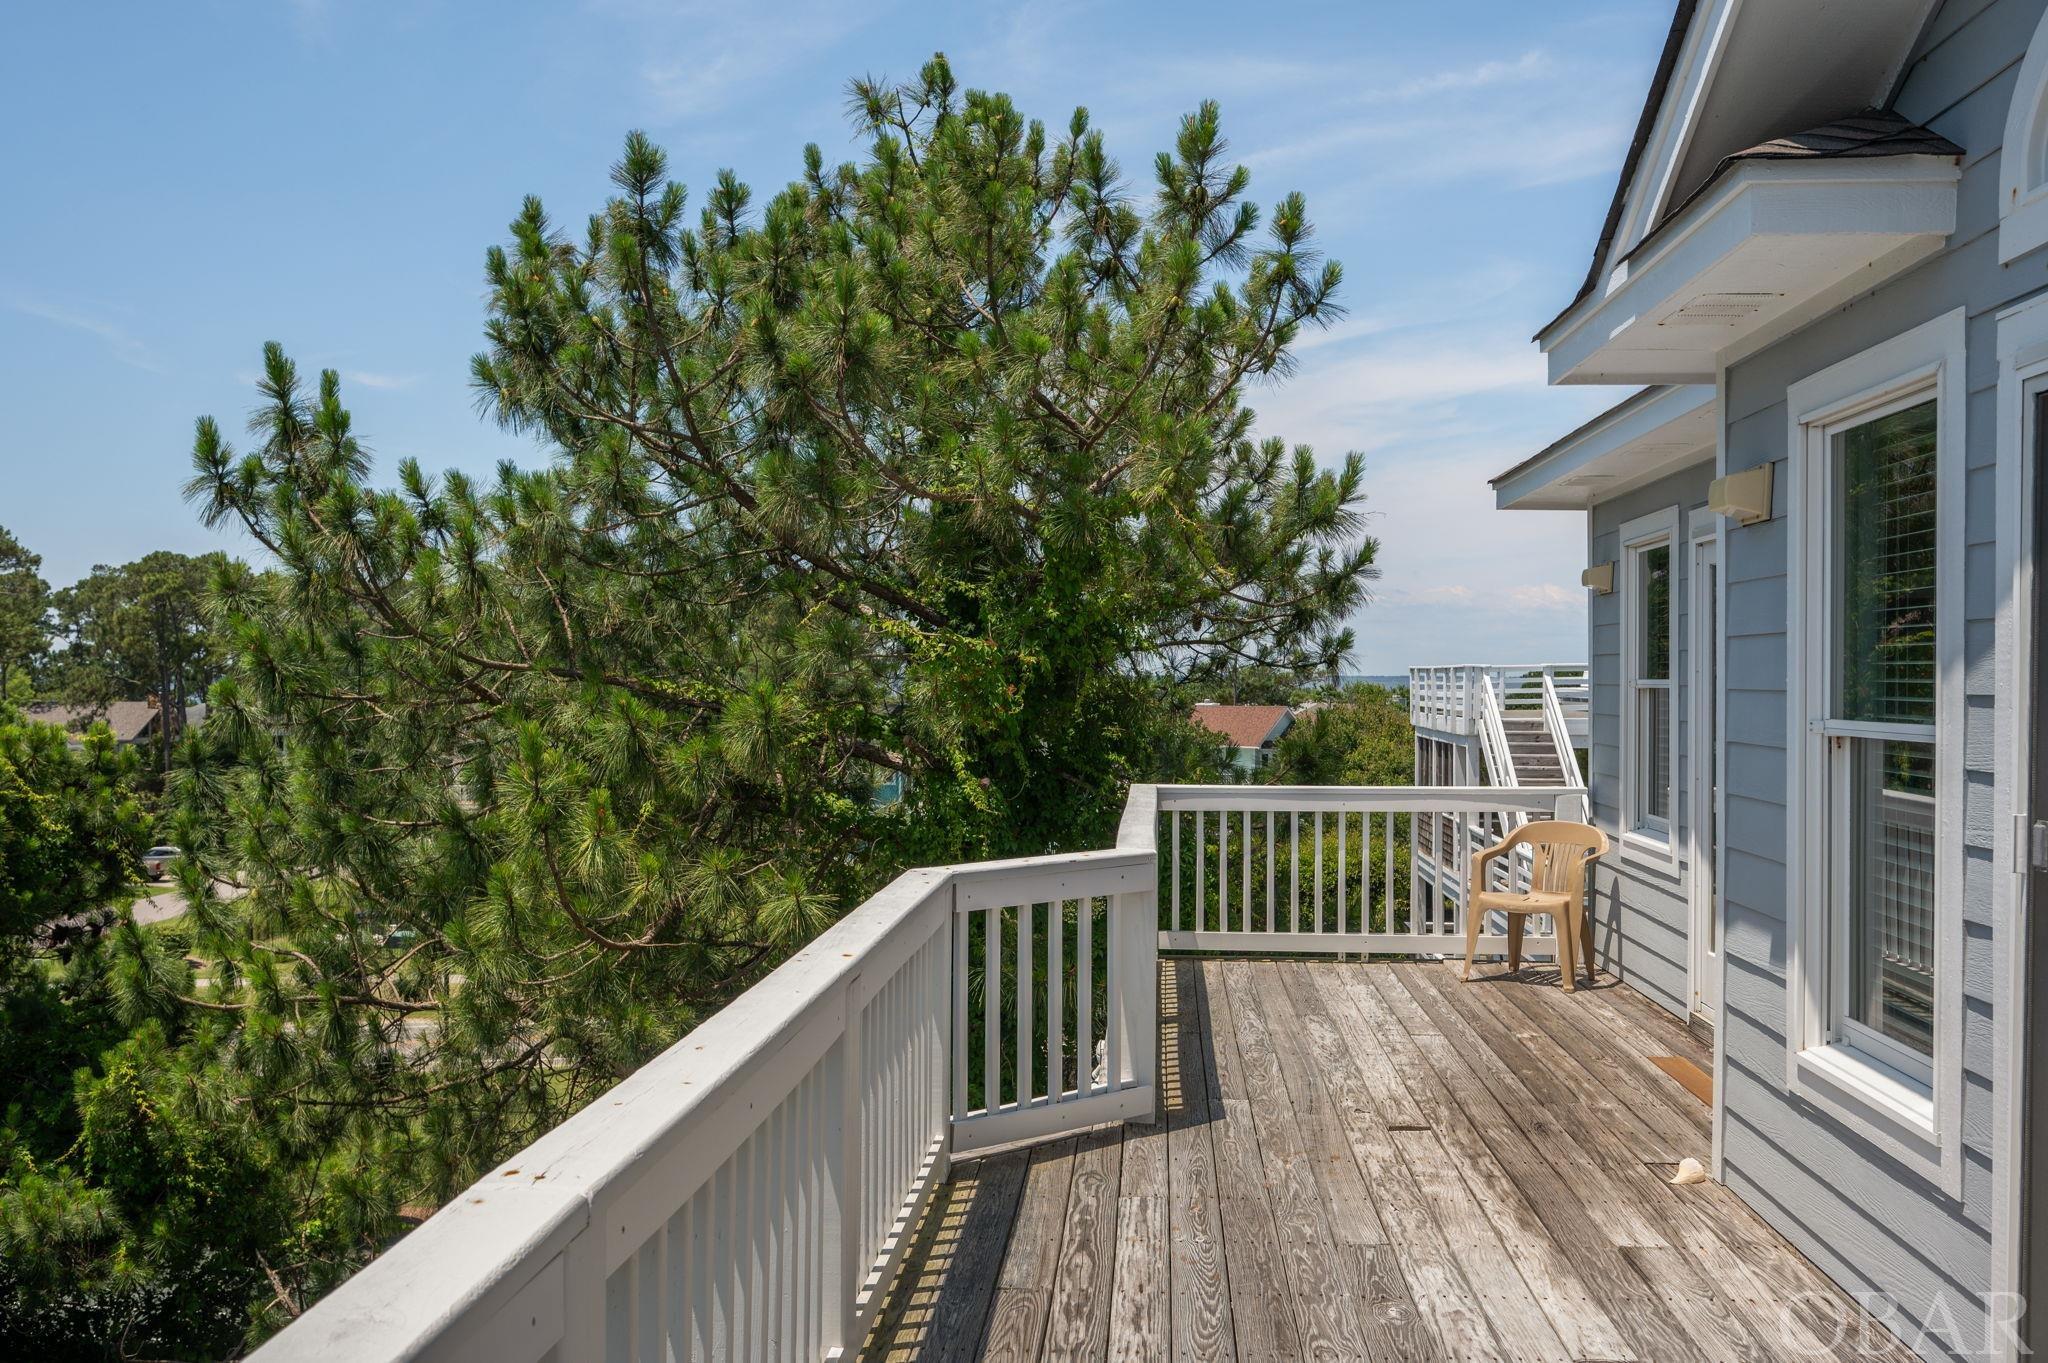 1055 Beacon Hill Drive, Corolla, NC 27927, 5 Bedrooms Bedrooms, ,5 BathroomsBathrooms,Residential,For sale,Beacon Hill Drive,126155